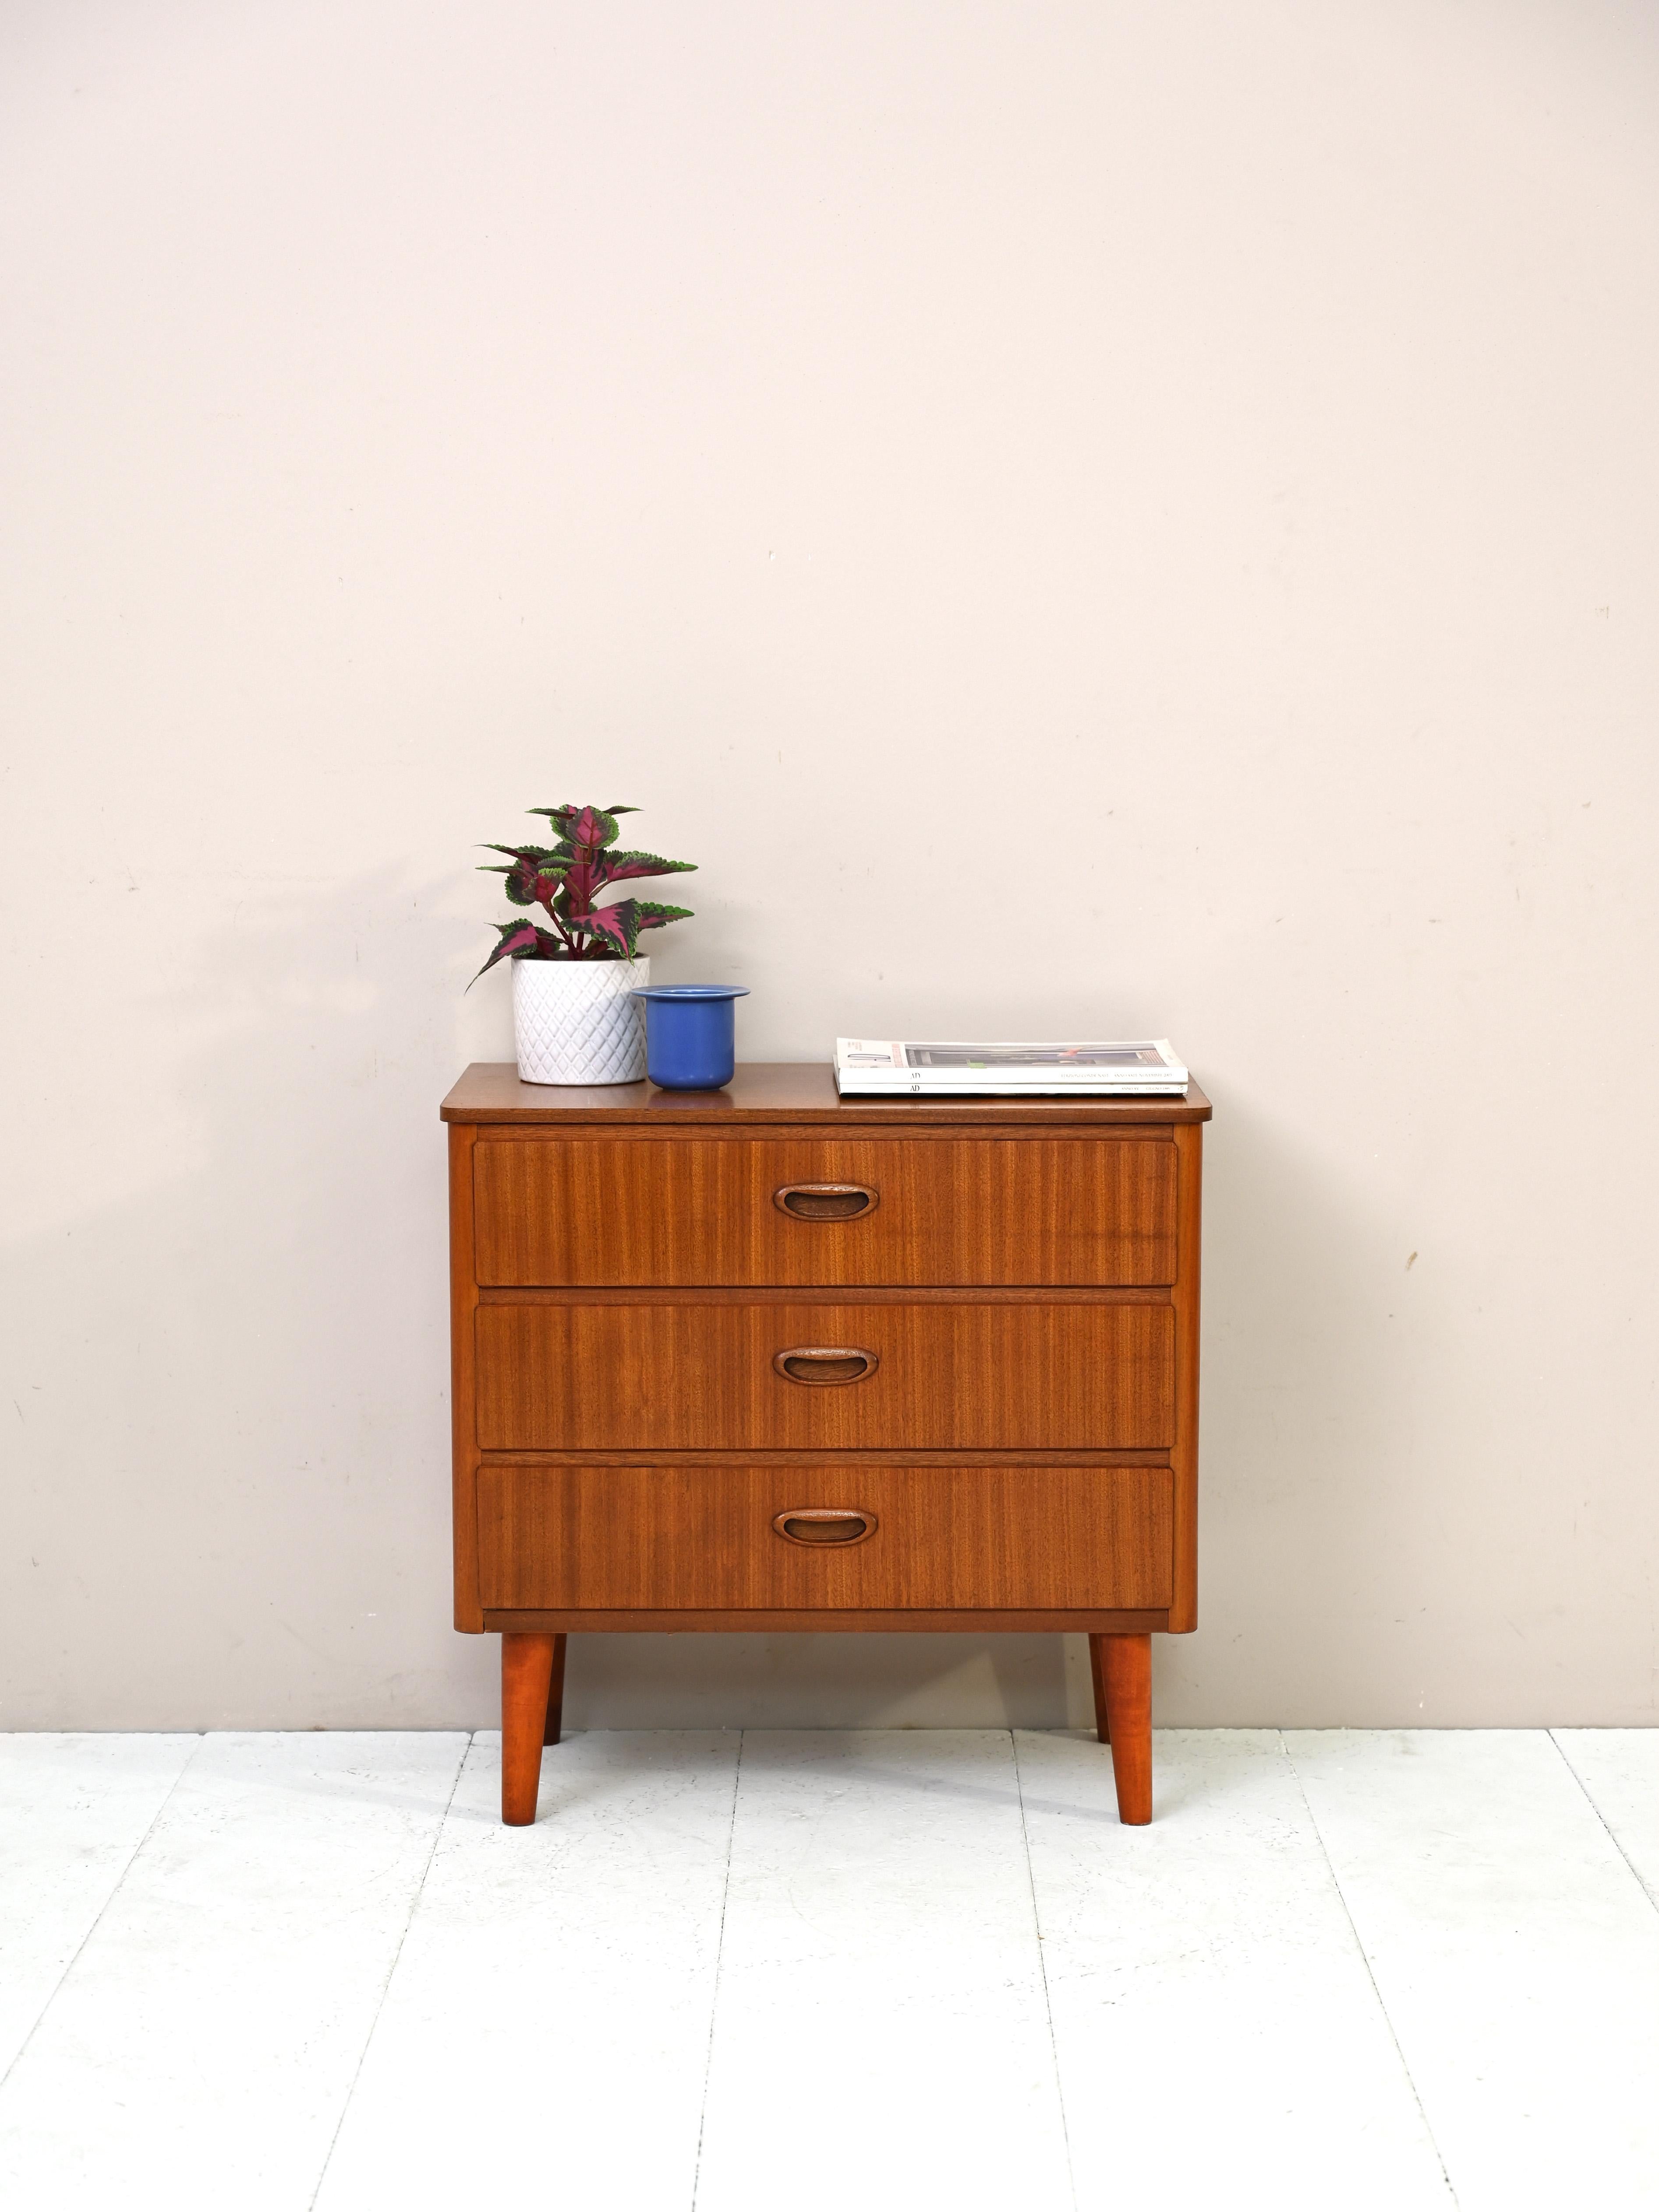 Cabinet with three drawers produced in the 1950s.
The structure is linear and no-frills but enriched by the wooden handle of the drawers and the
distinctive conical legs.
A piece of furniture that can be used both with the classic function of a